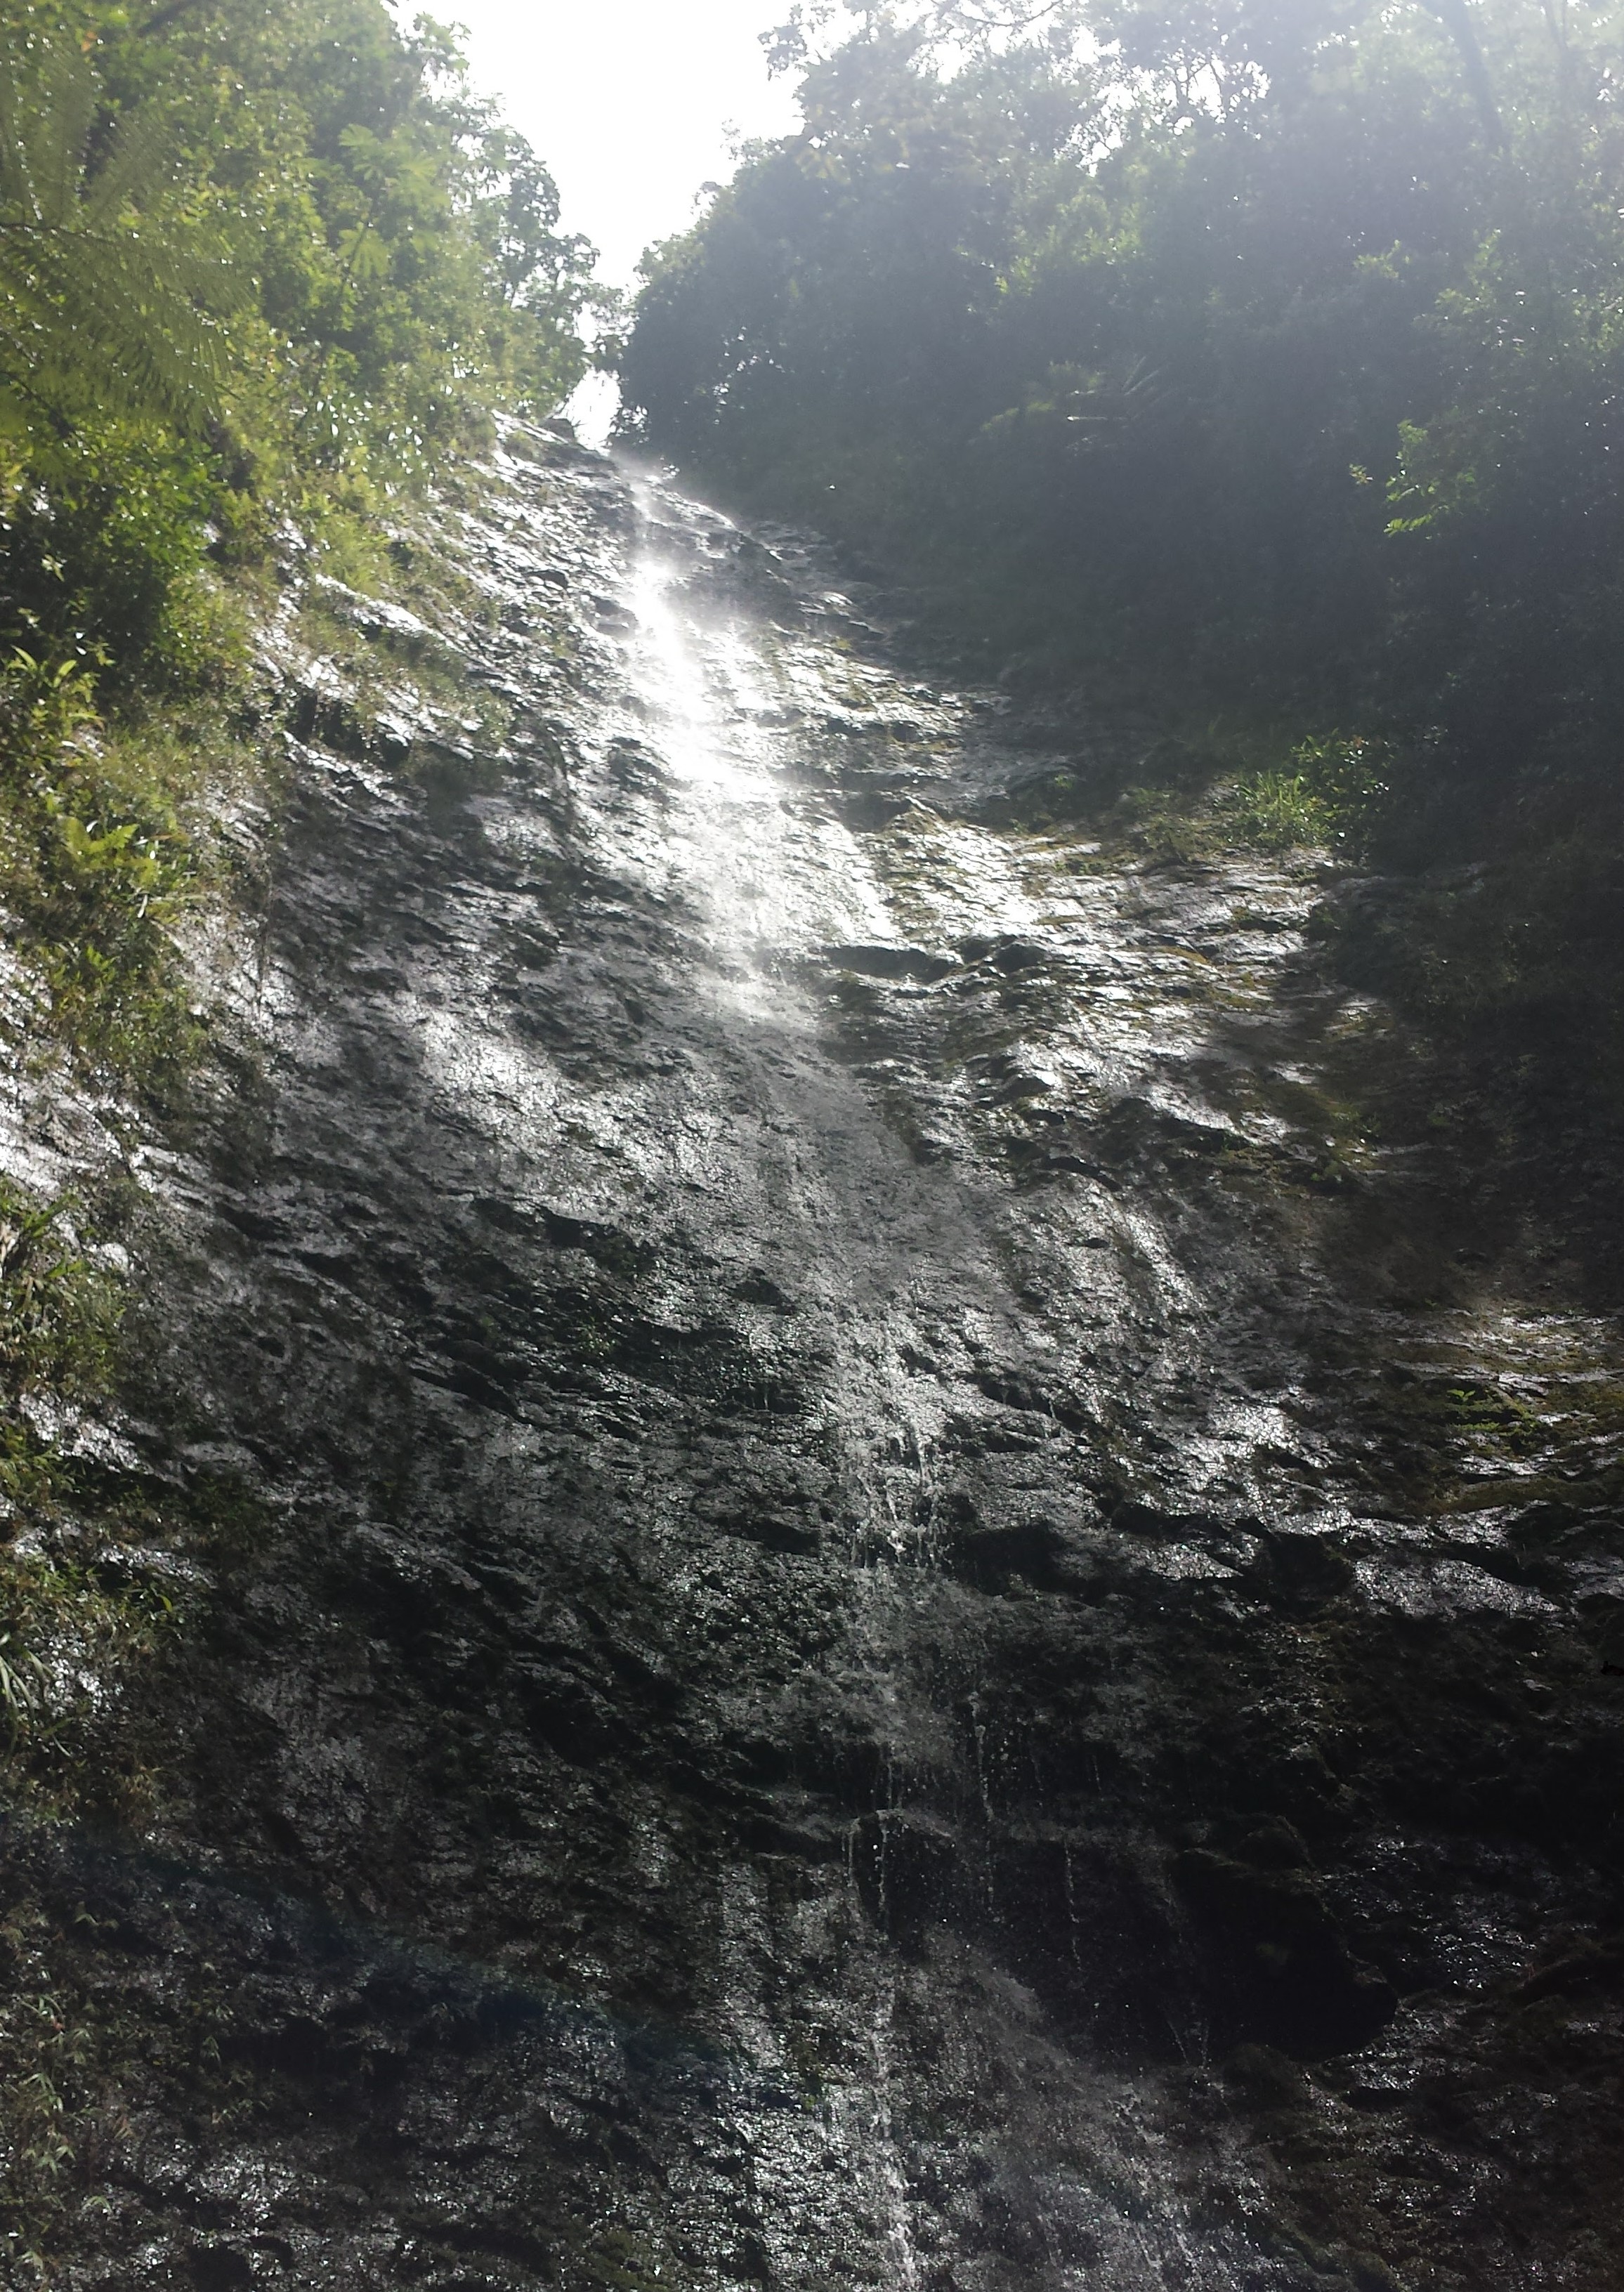 A view of the Manoa Falls, one of the best waterfall hikes in Oahu